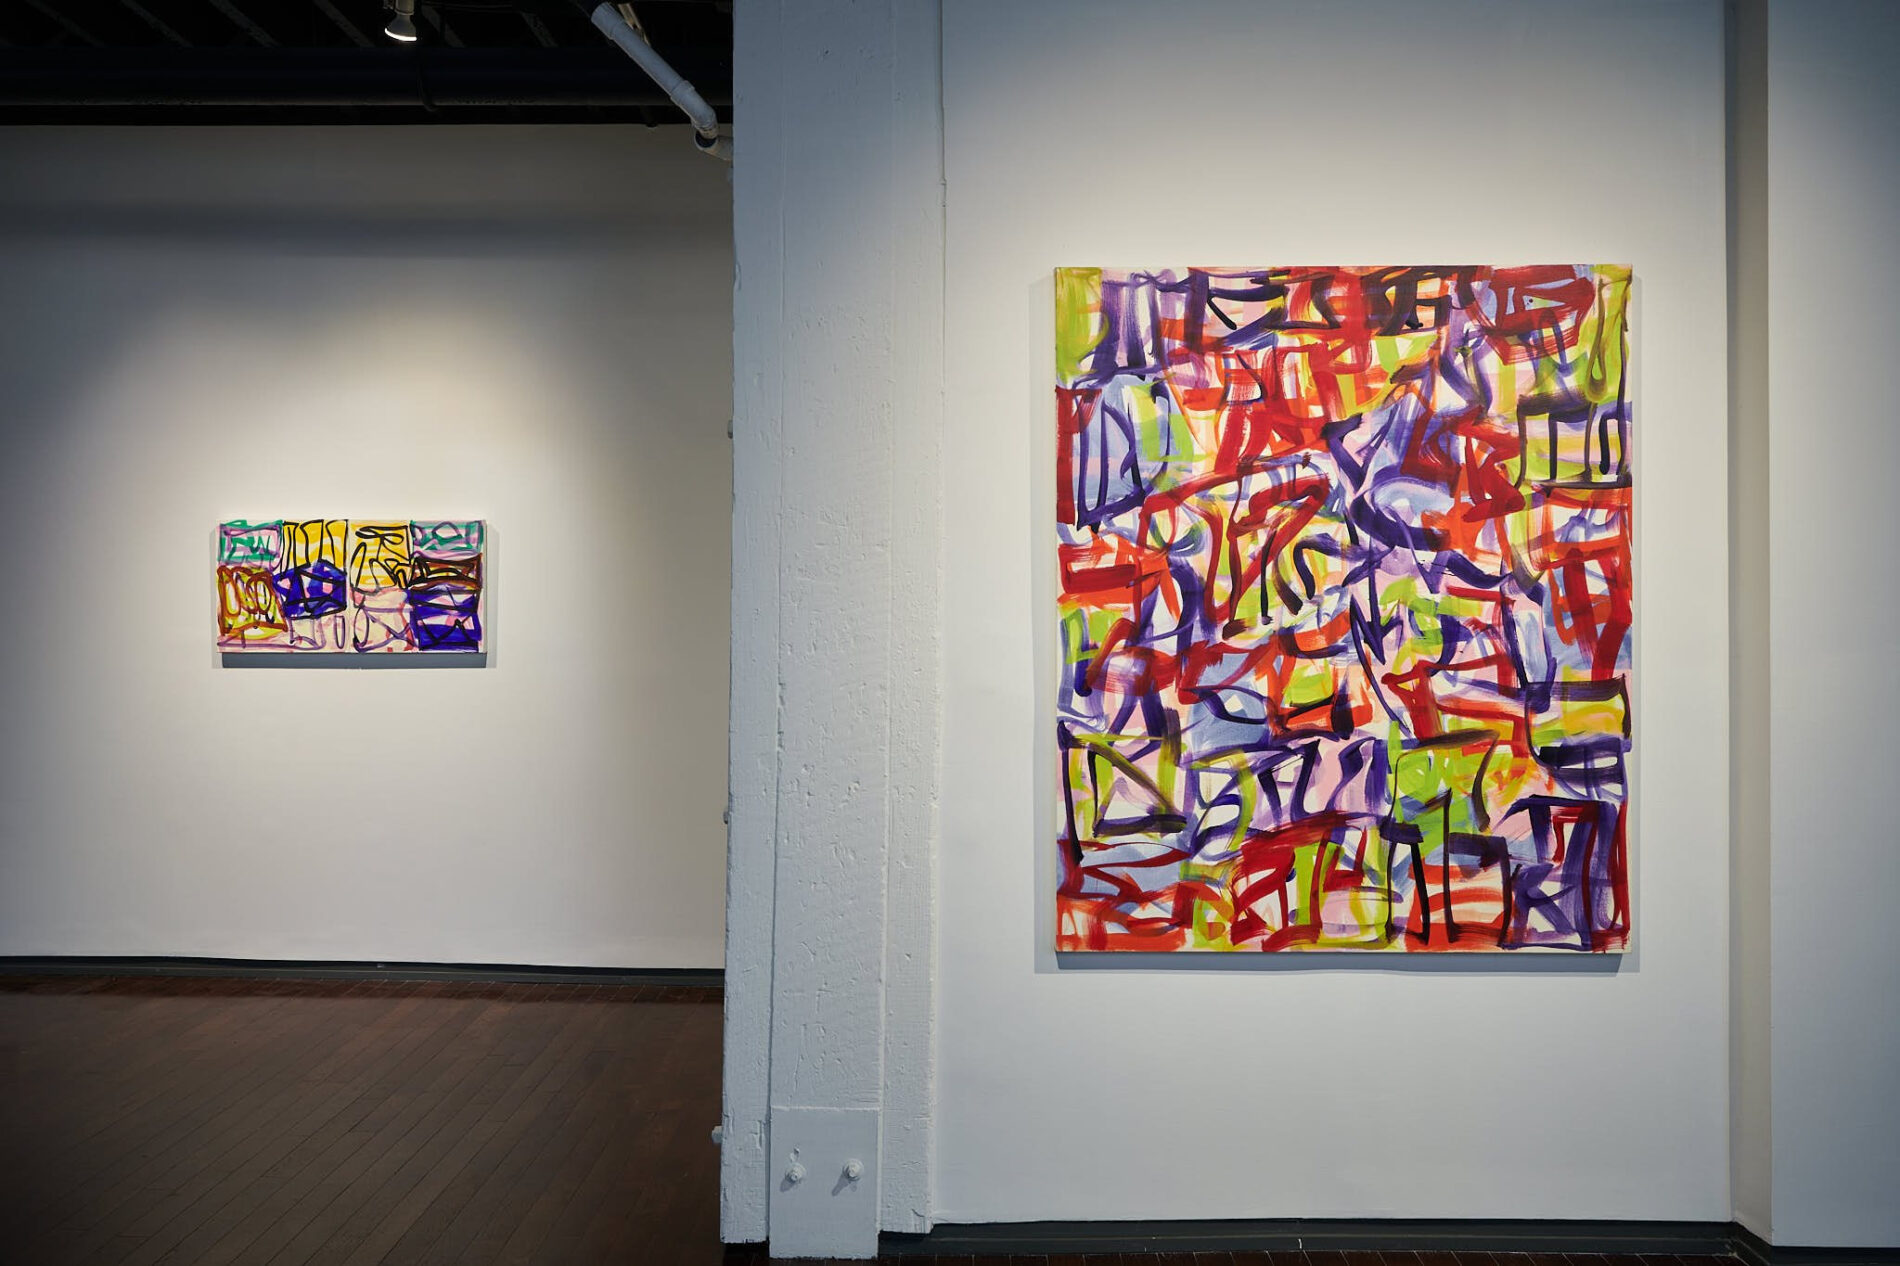 left: Melissa Meyer, Chelsea Quickstep III, 2022, Oil on canvas, 20x40 in. right: Melissa Meyer, Living in the City, 2016, Oil on canvas, 60x50 in.